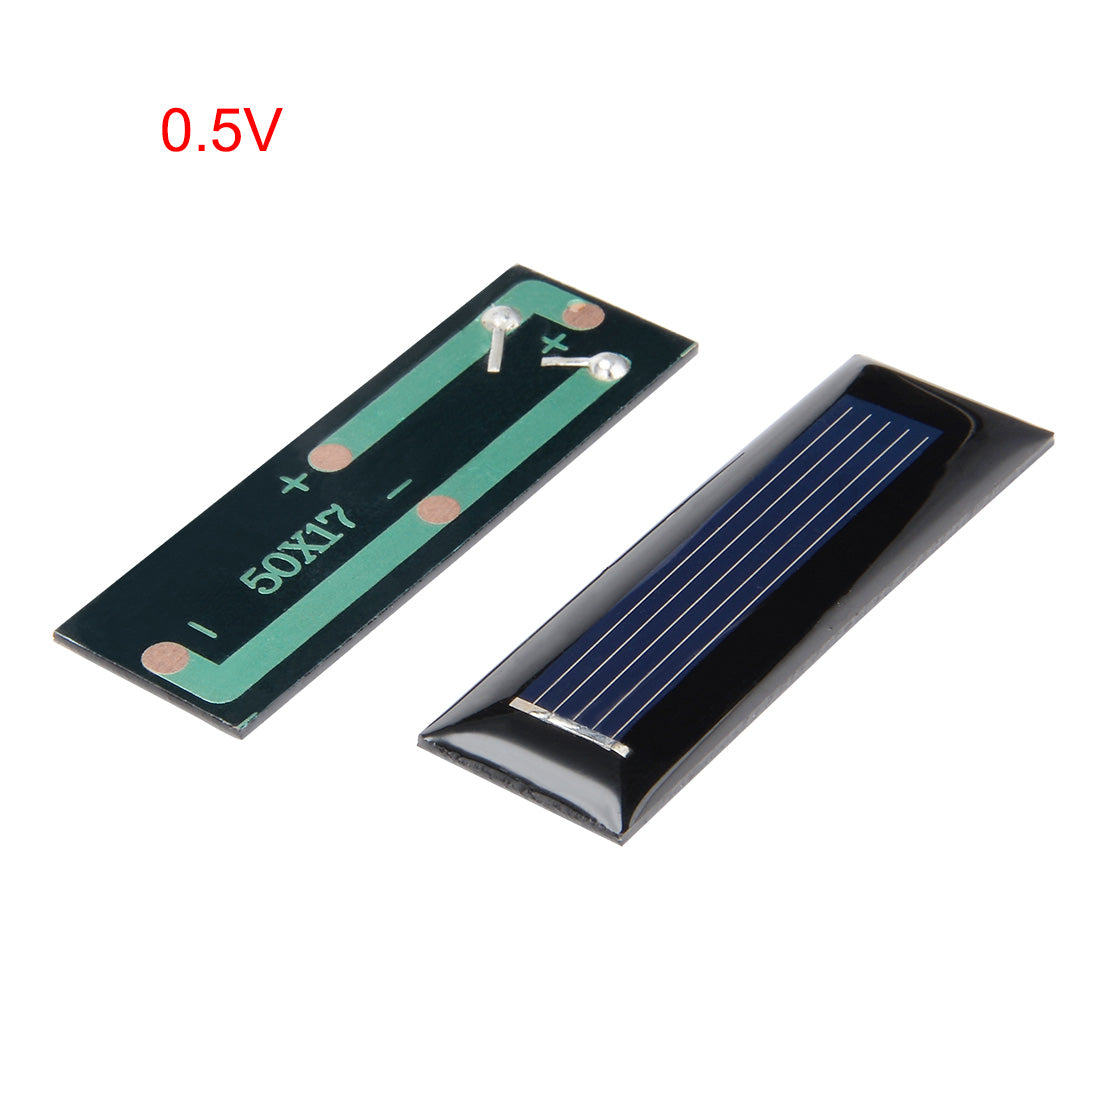 uxcell Uxcell 5Pcs 0.5V 80mA Poly Mini Solar Cell Panel Module DIY for Phone Light Toys Charger 50mm x 17mm